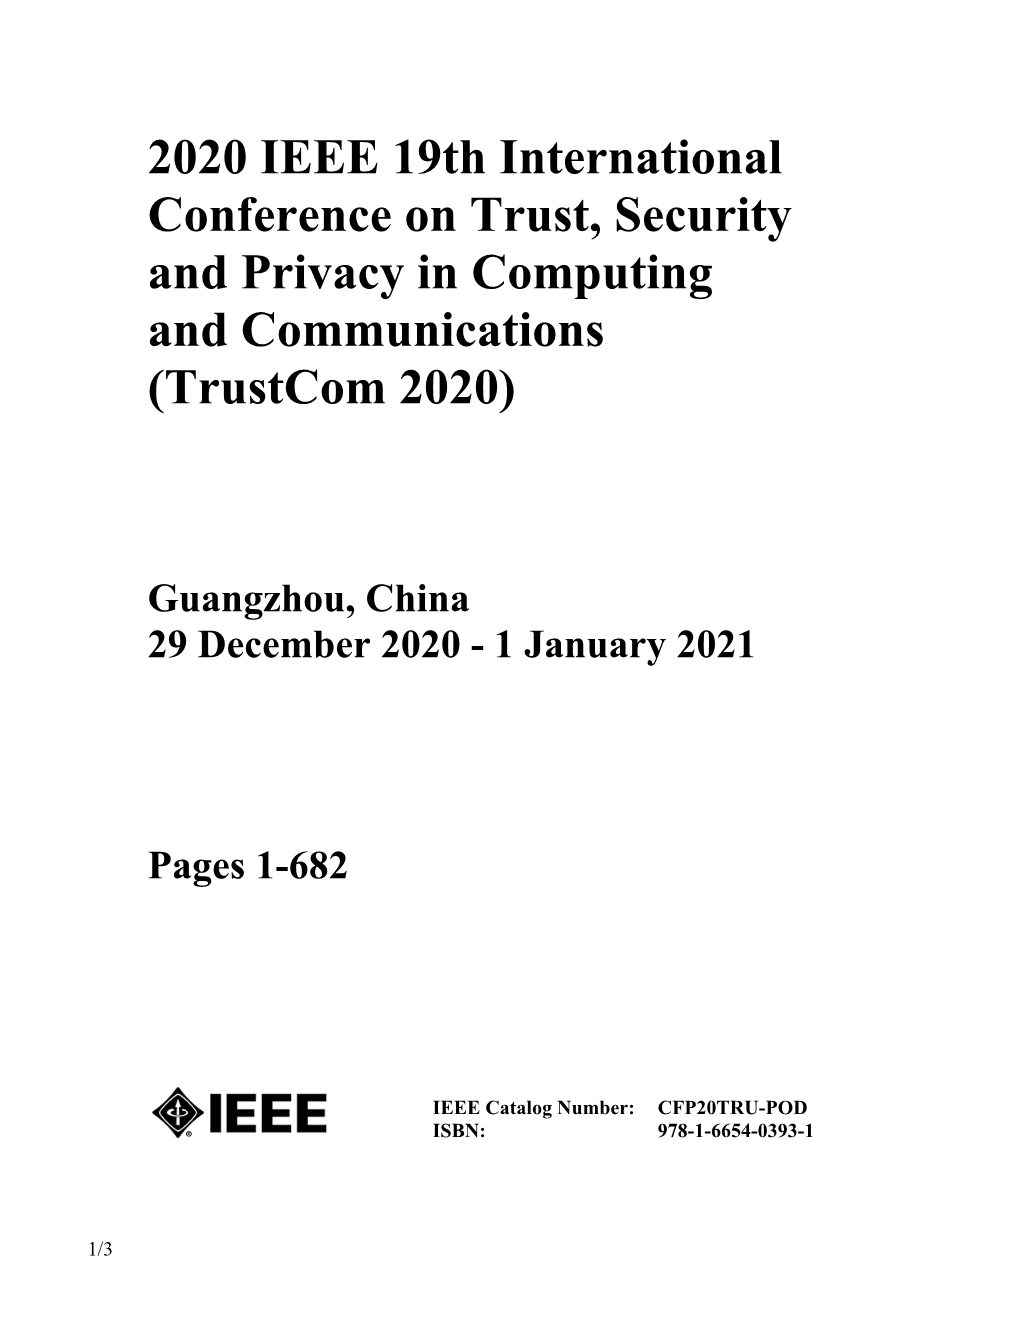 2020 IEEE 19Th International Conference on Trust, Security and Privacy in Computing and Communications